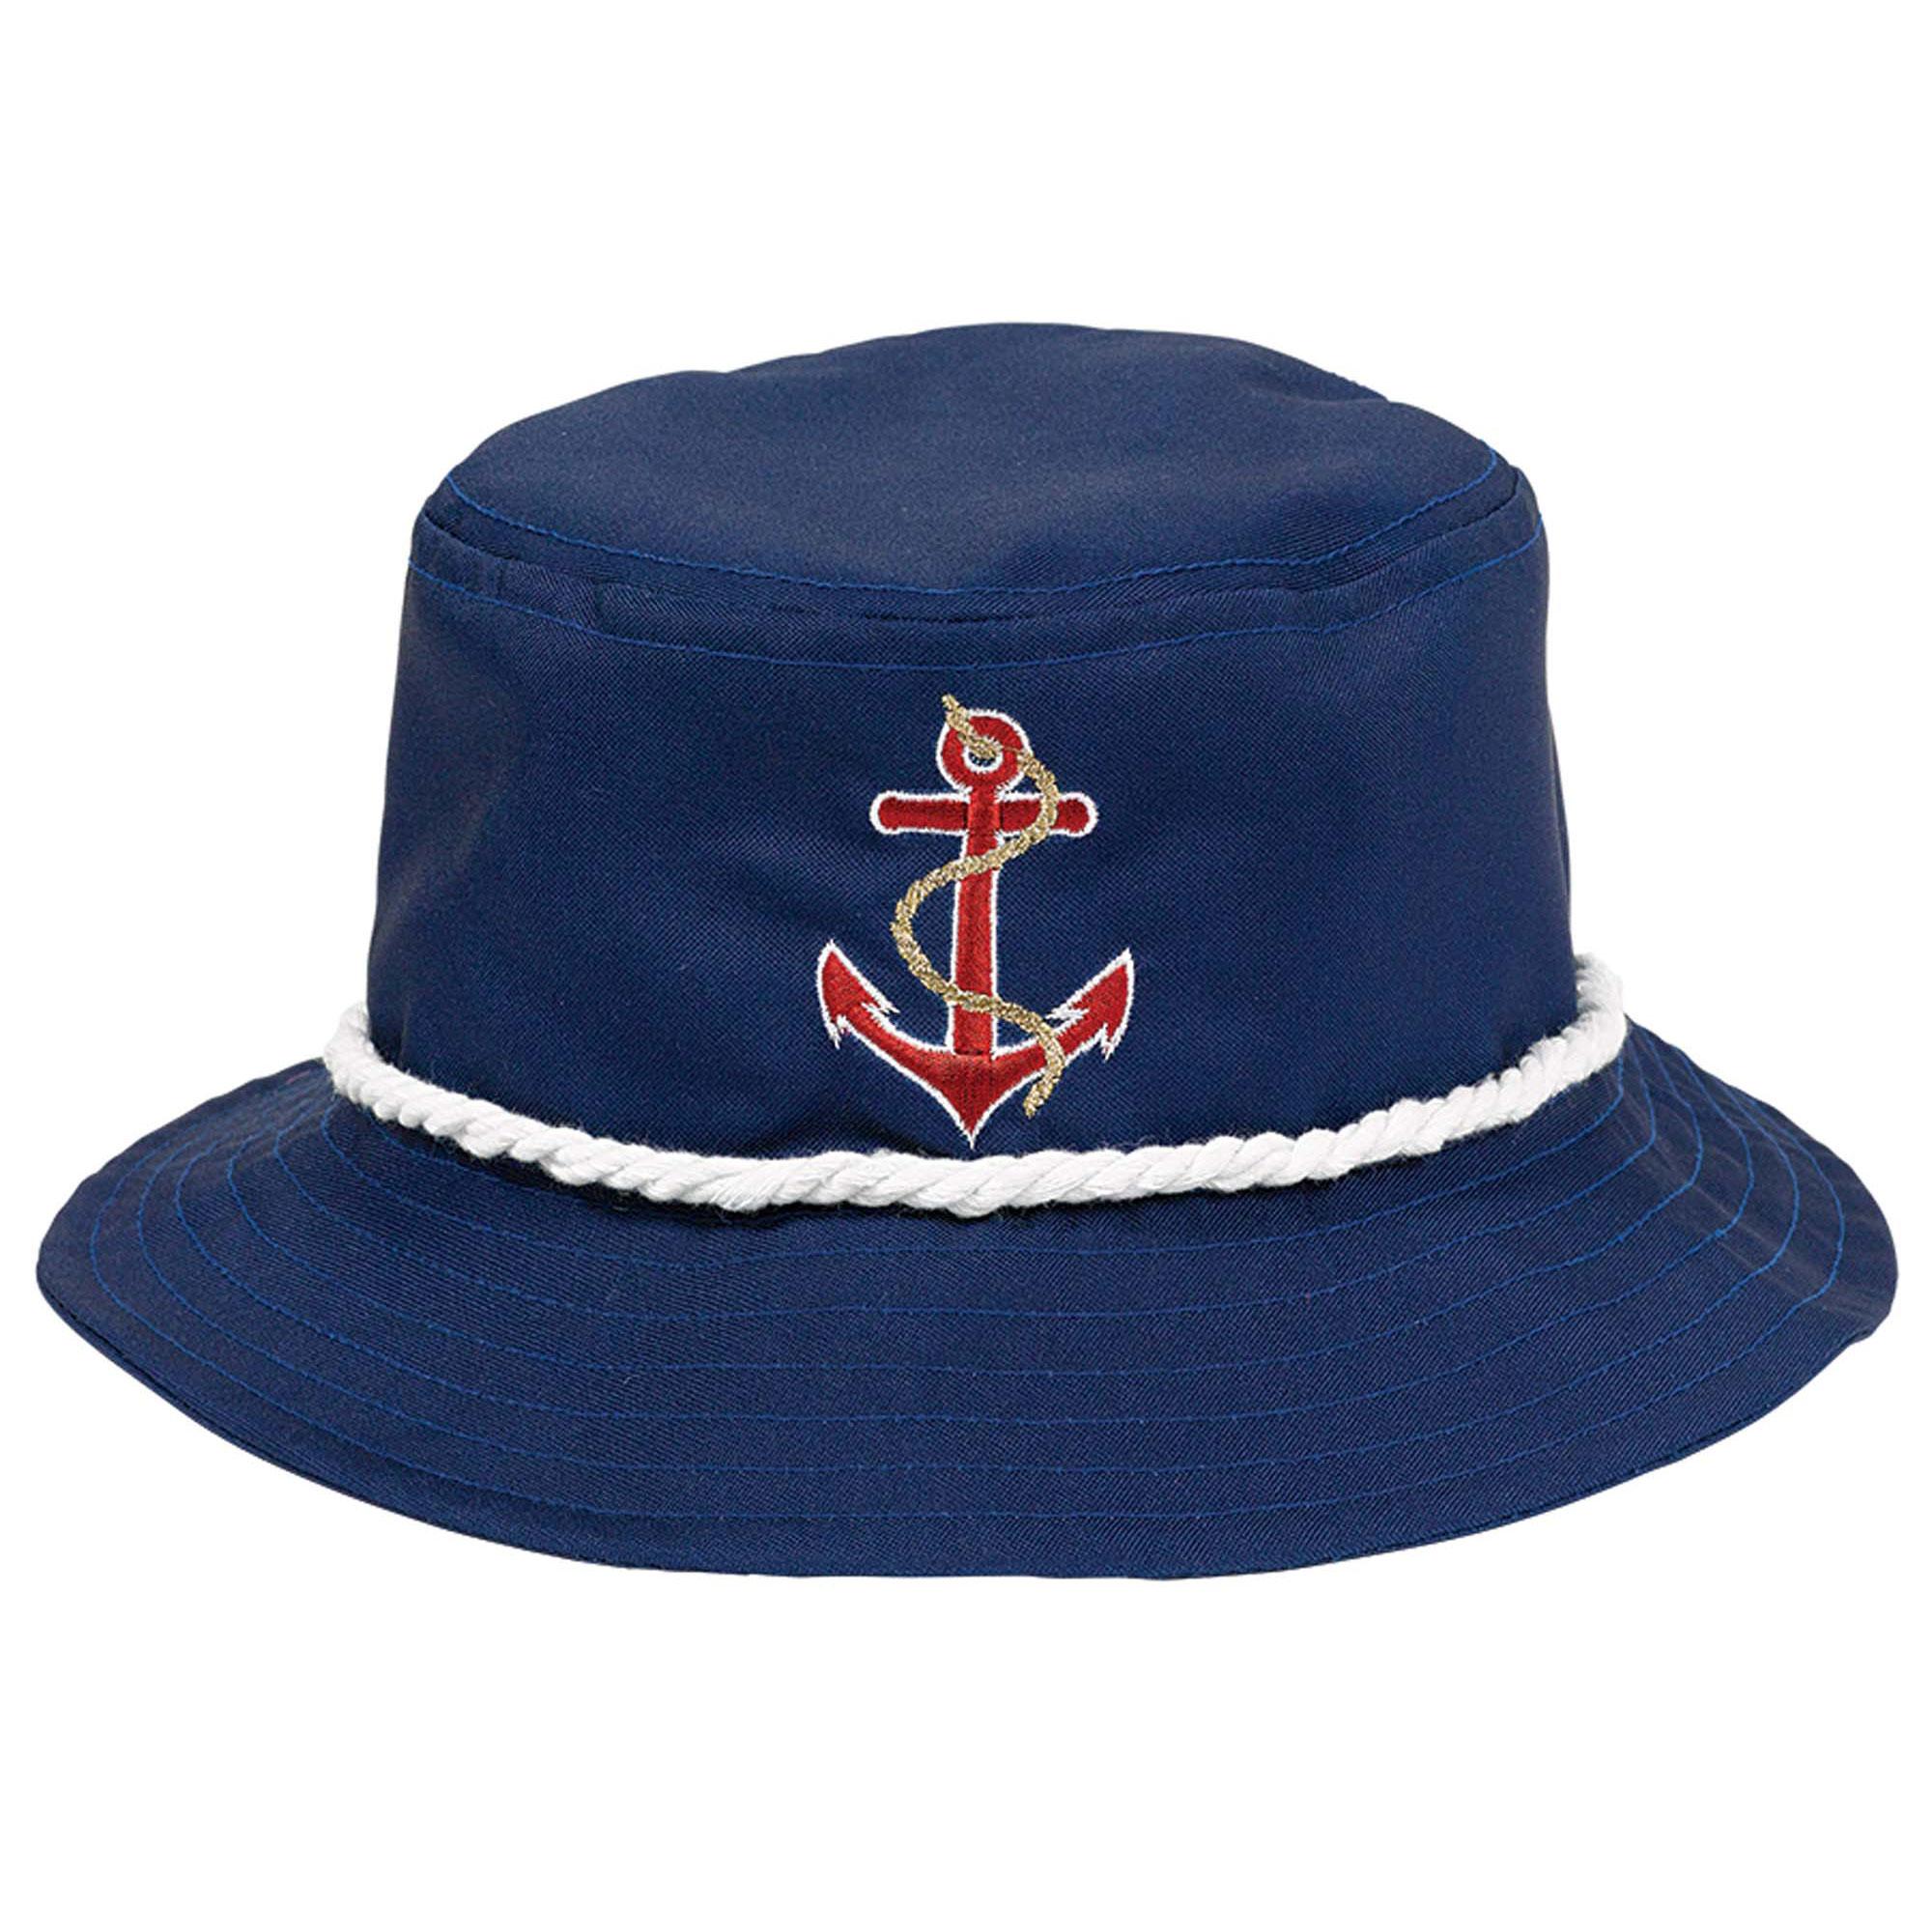 Anchors Aweigh Bucket Hat Costumes & Apparel - Party Centre